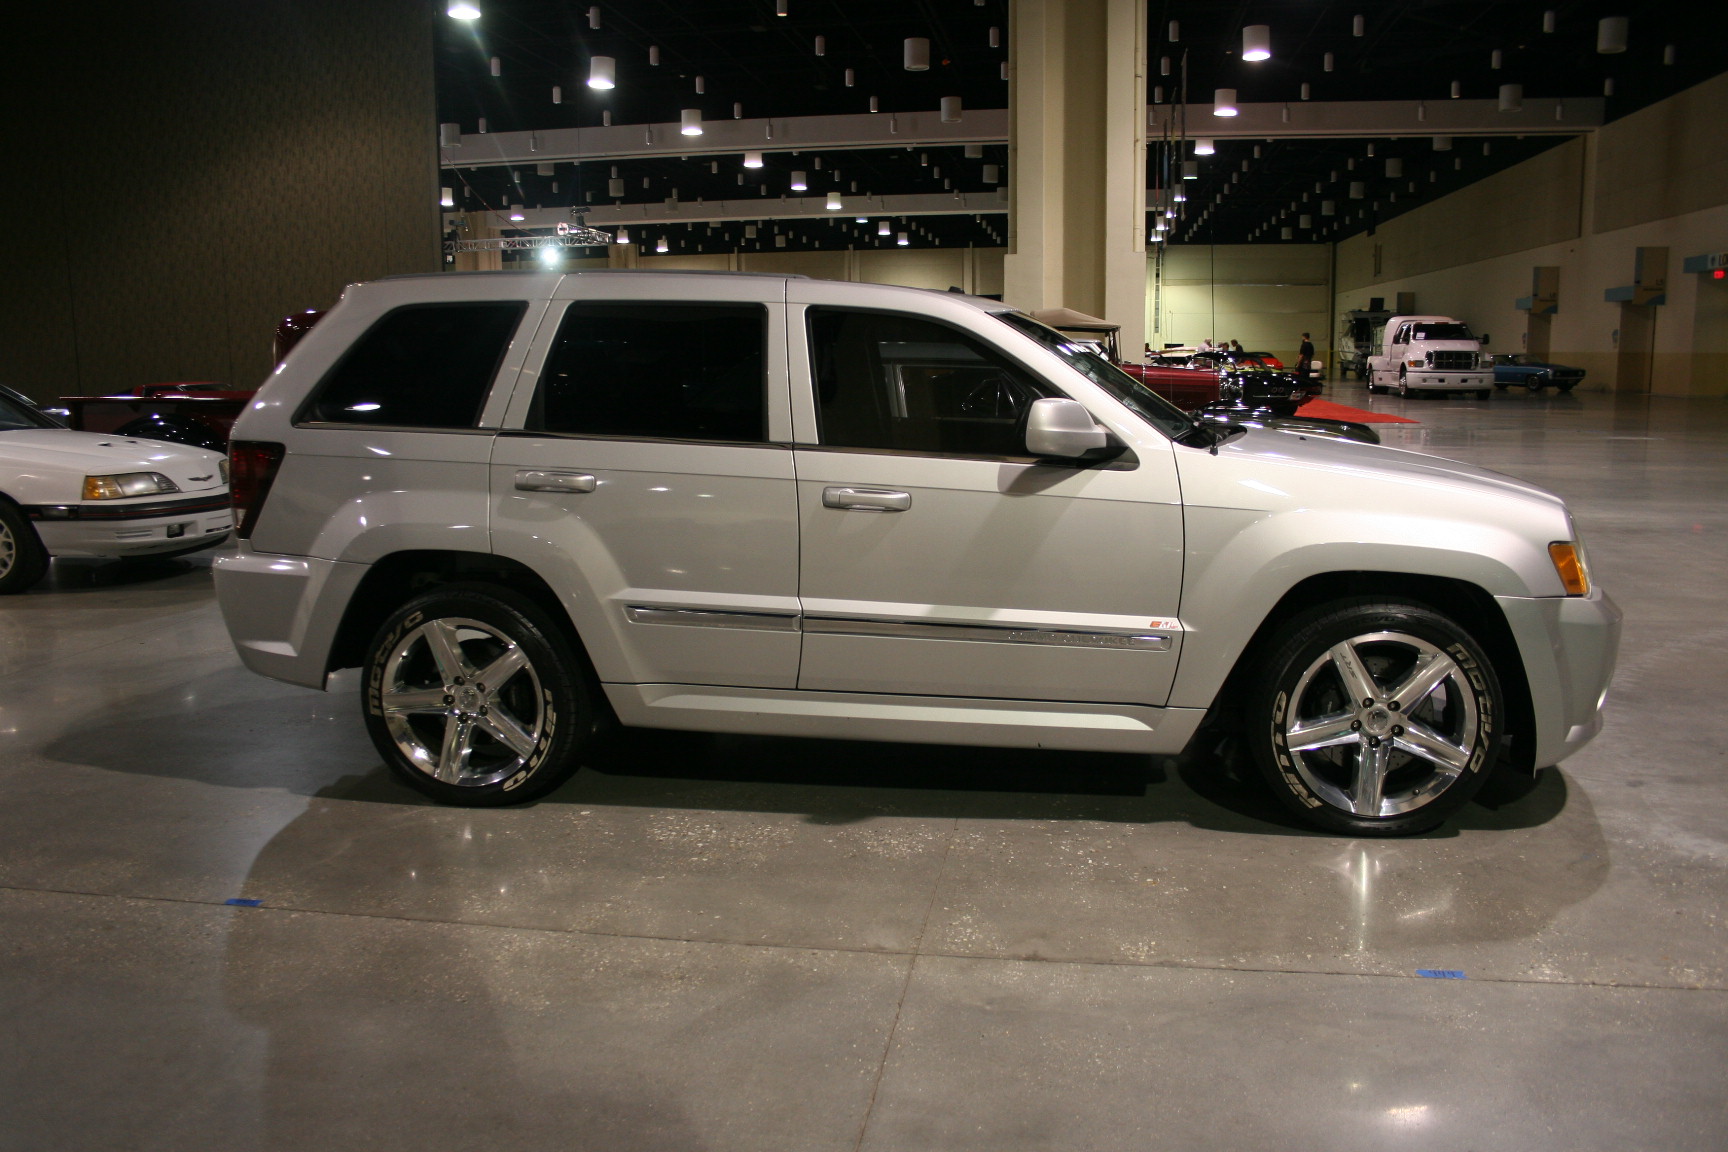 2nd Image of a 2008 JEEP GRAND CHEROKEE SRT-8